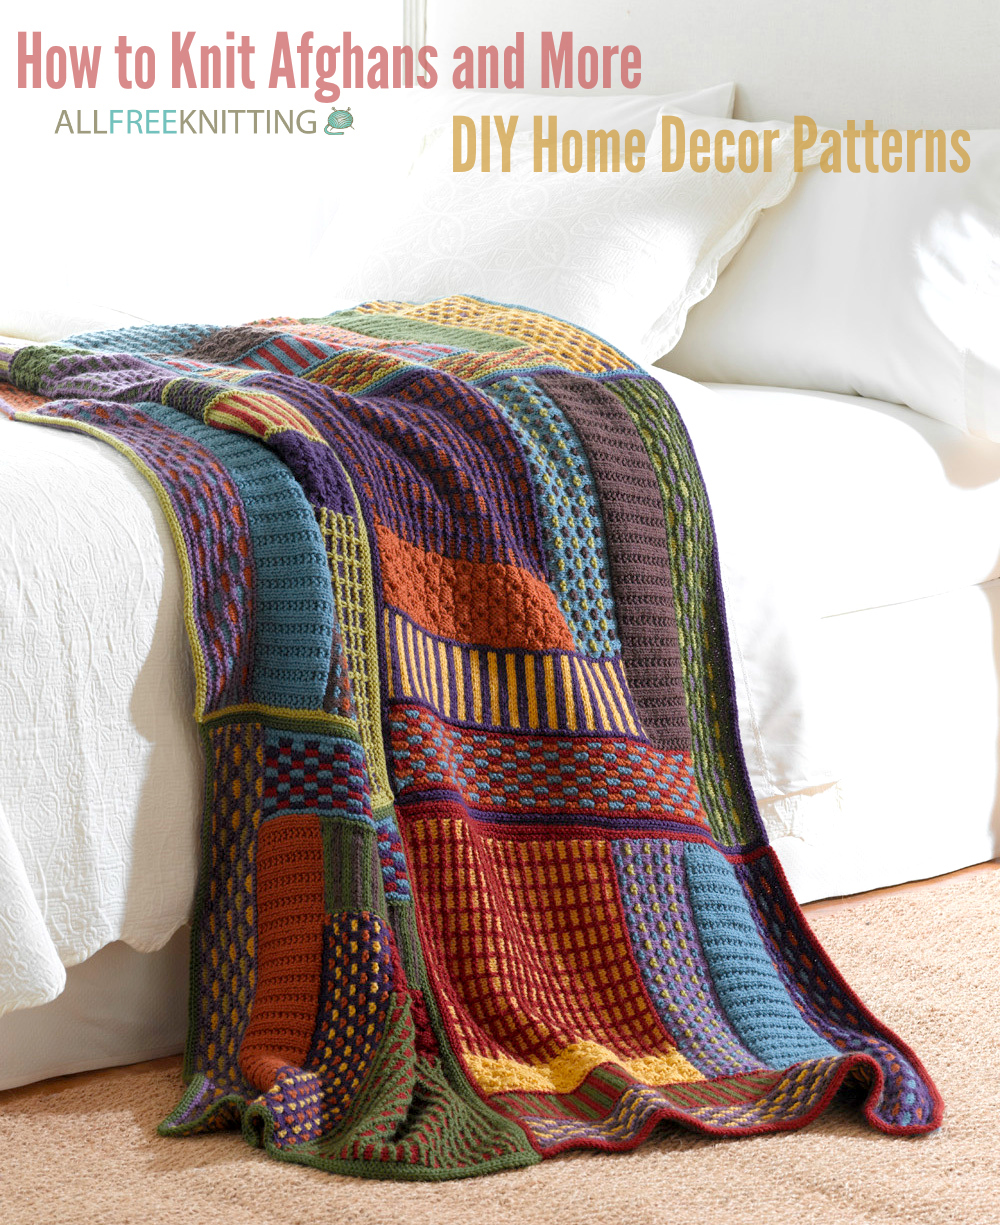 How to Knit Afghans and More 300 DIY Home Decor Patterns